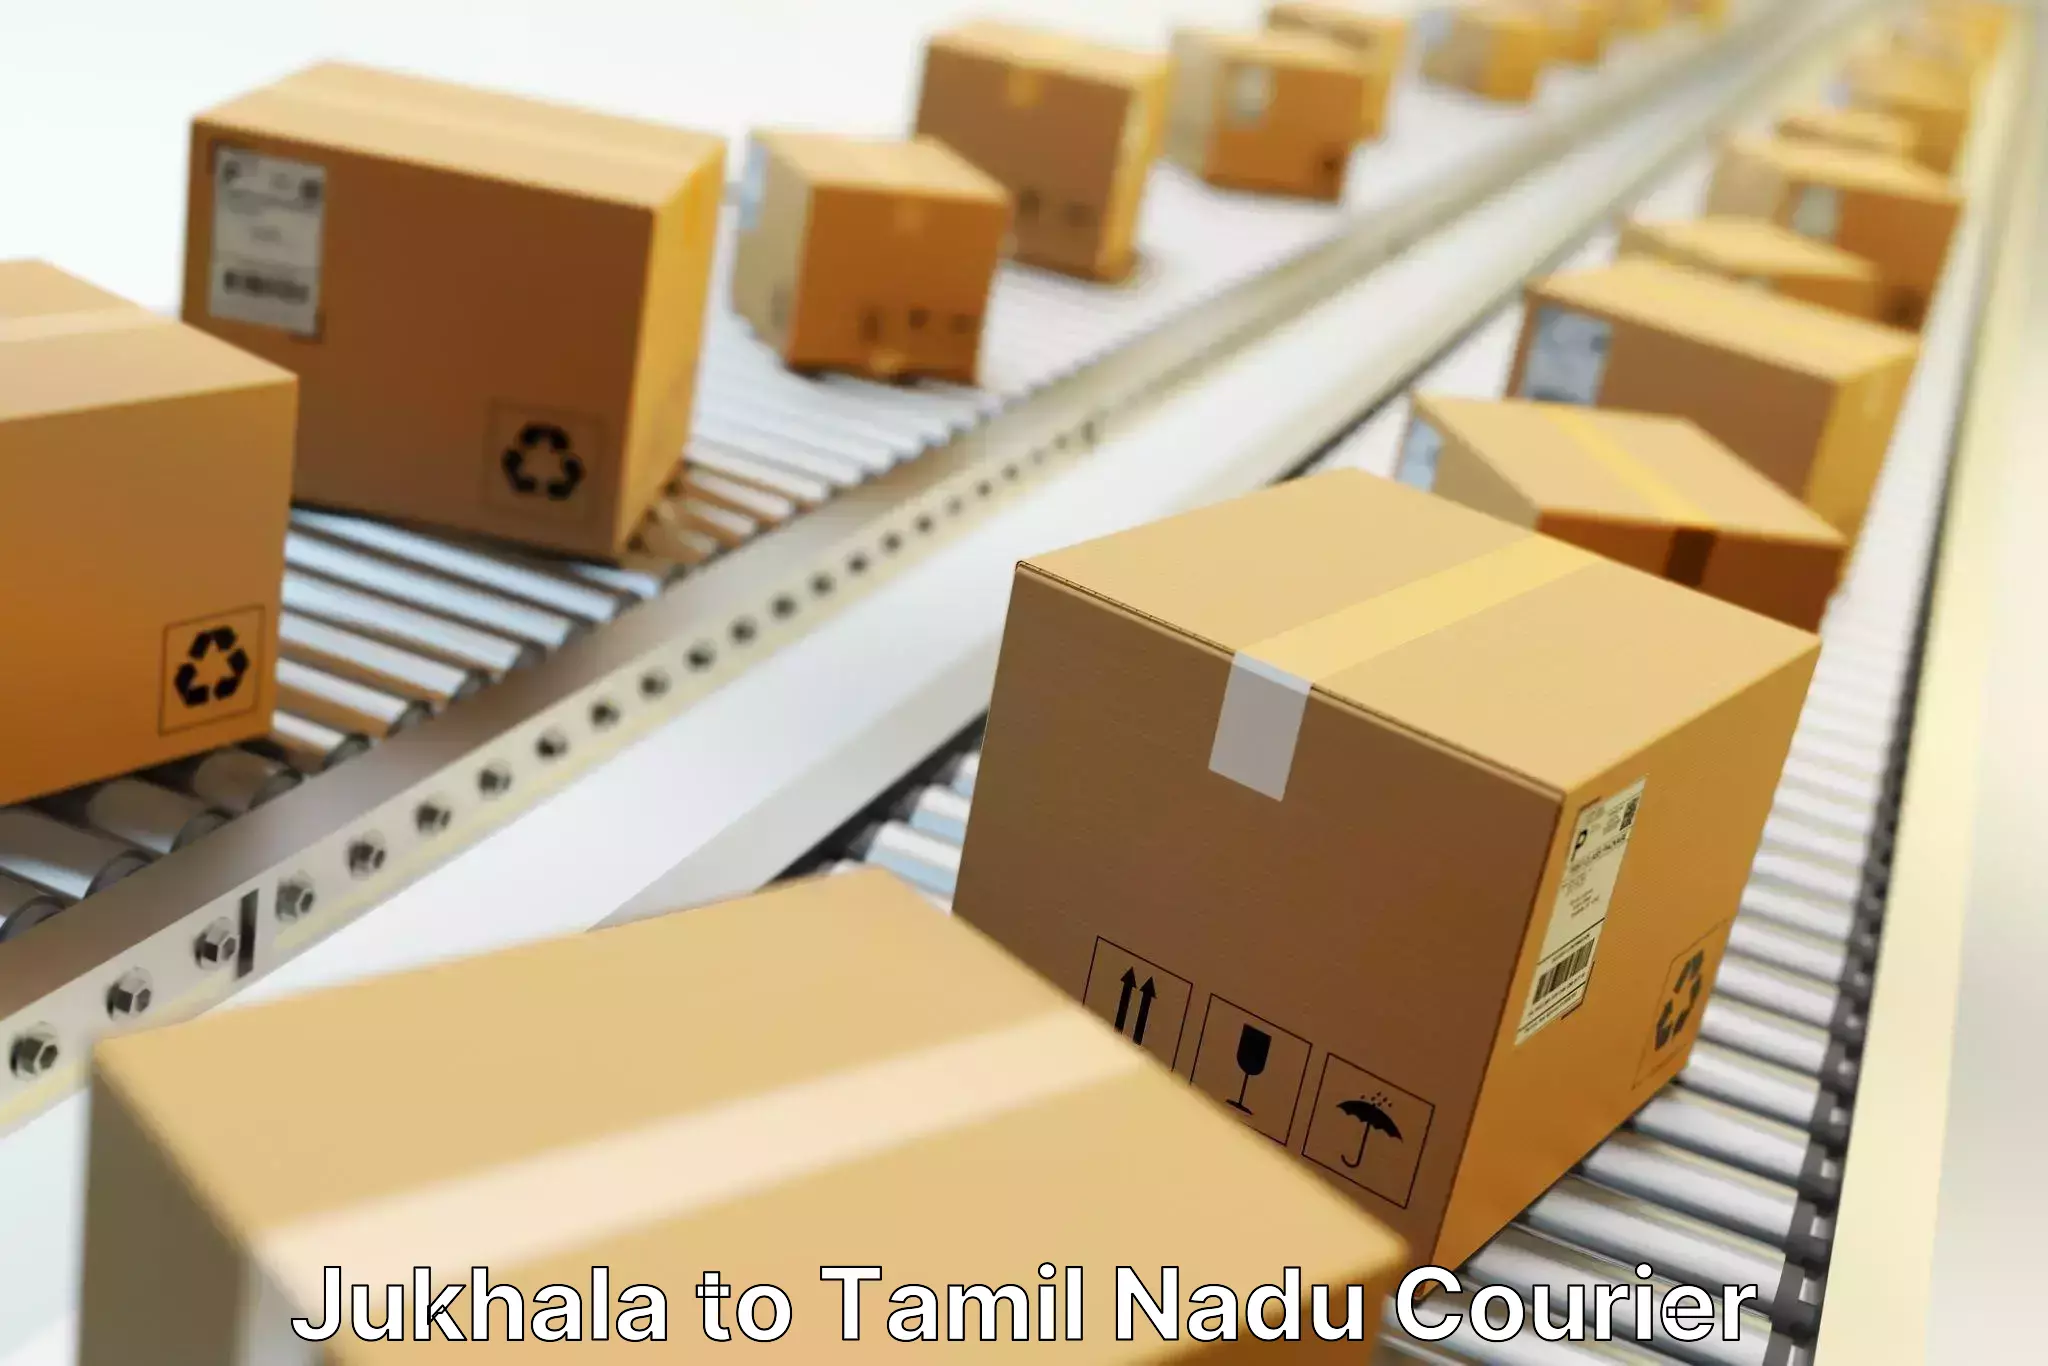 High value parcel delivery Jukhala to Tuticorin Port